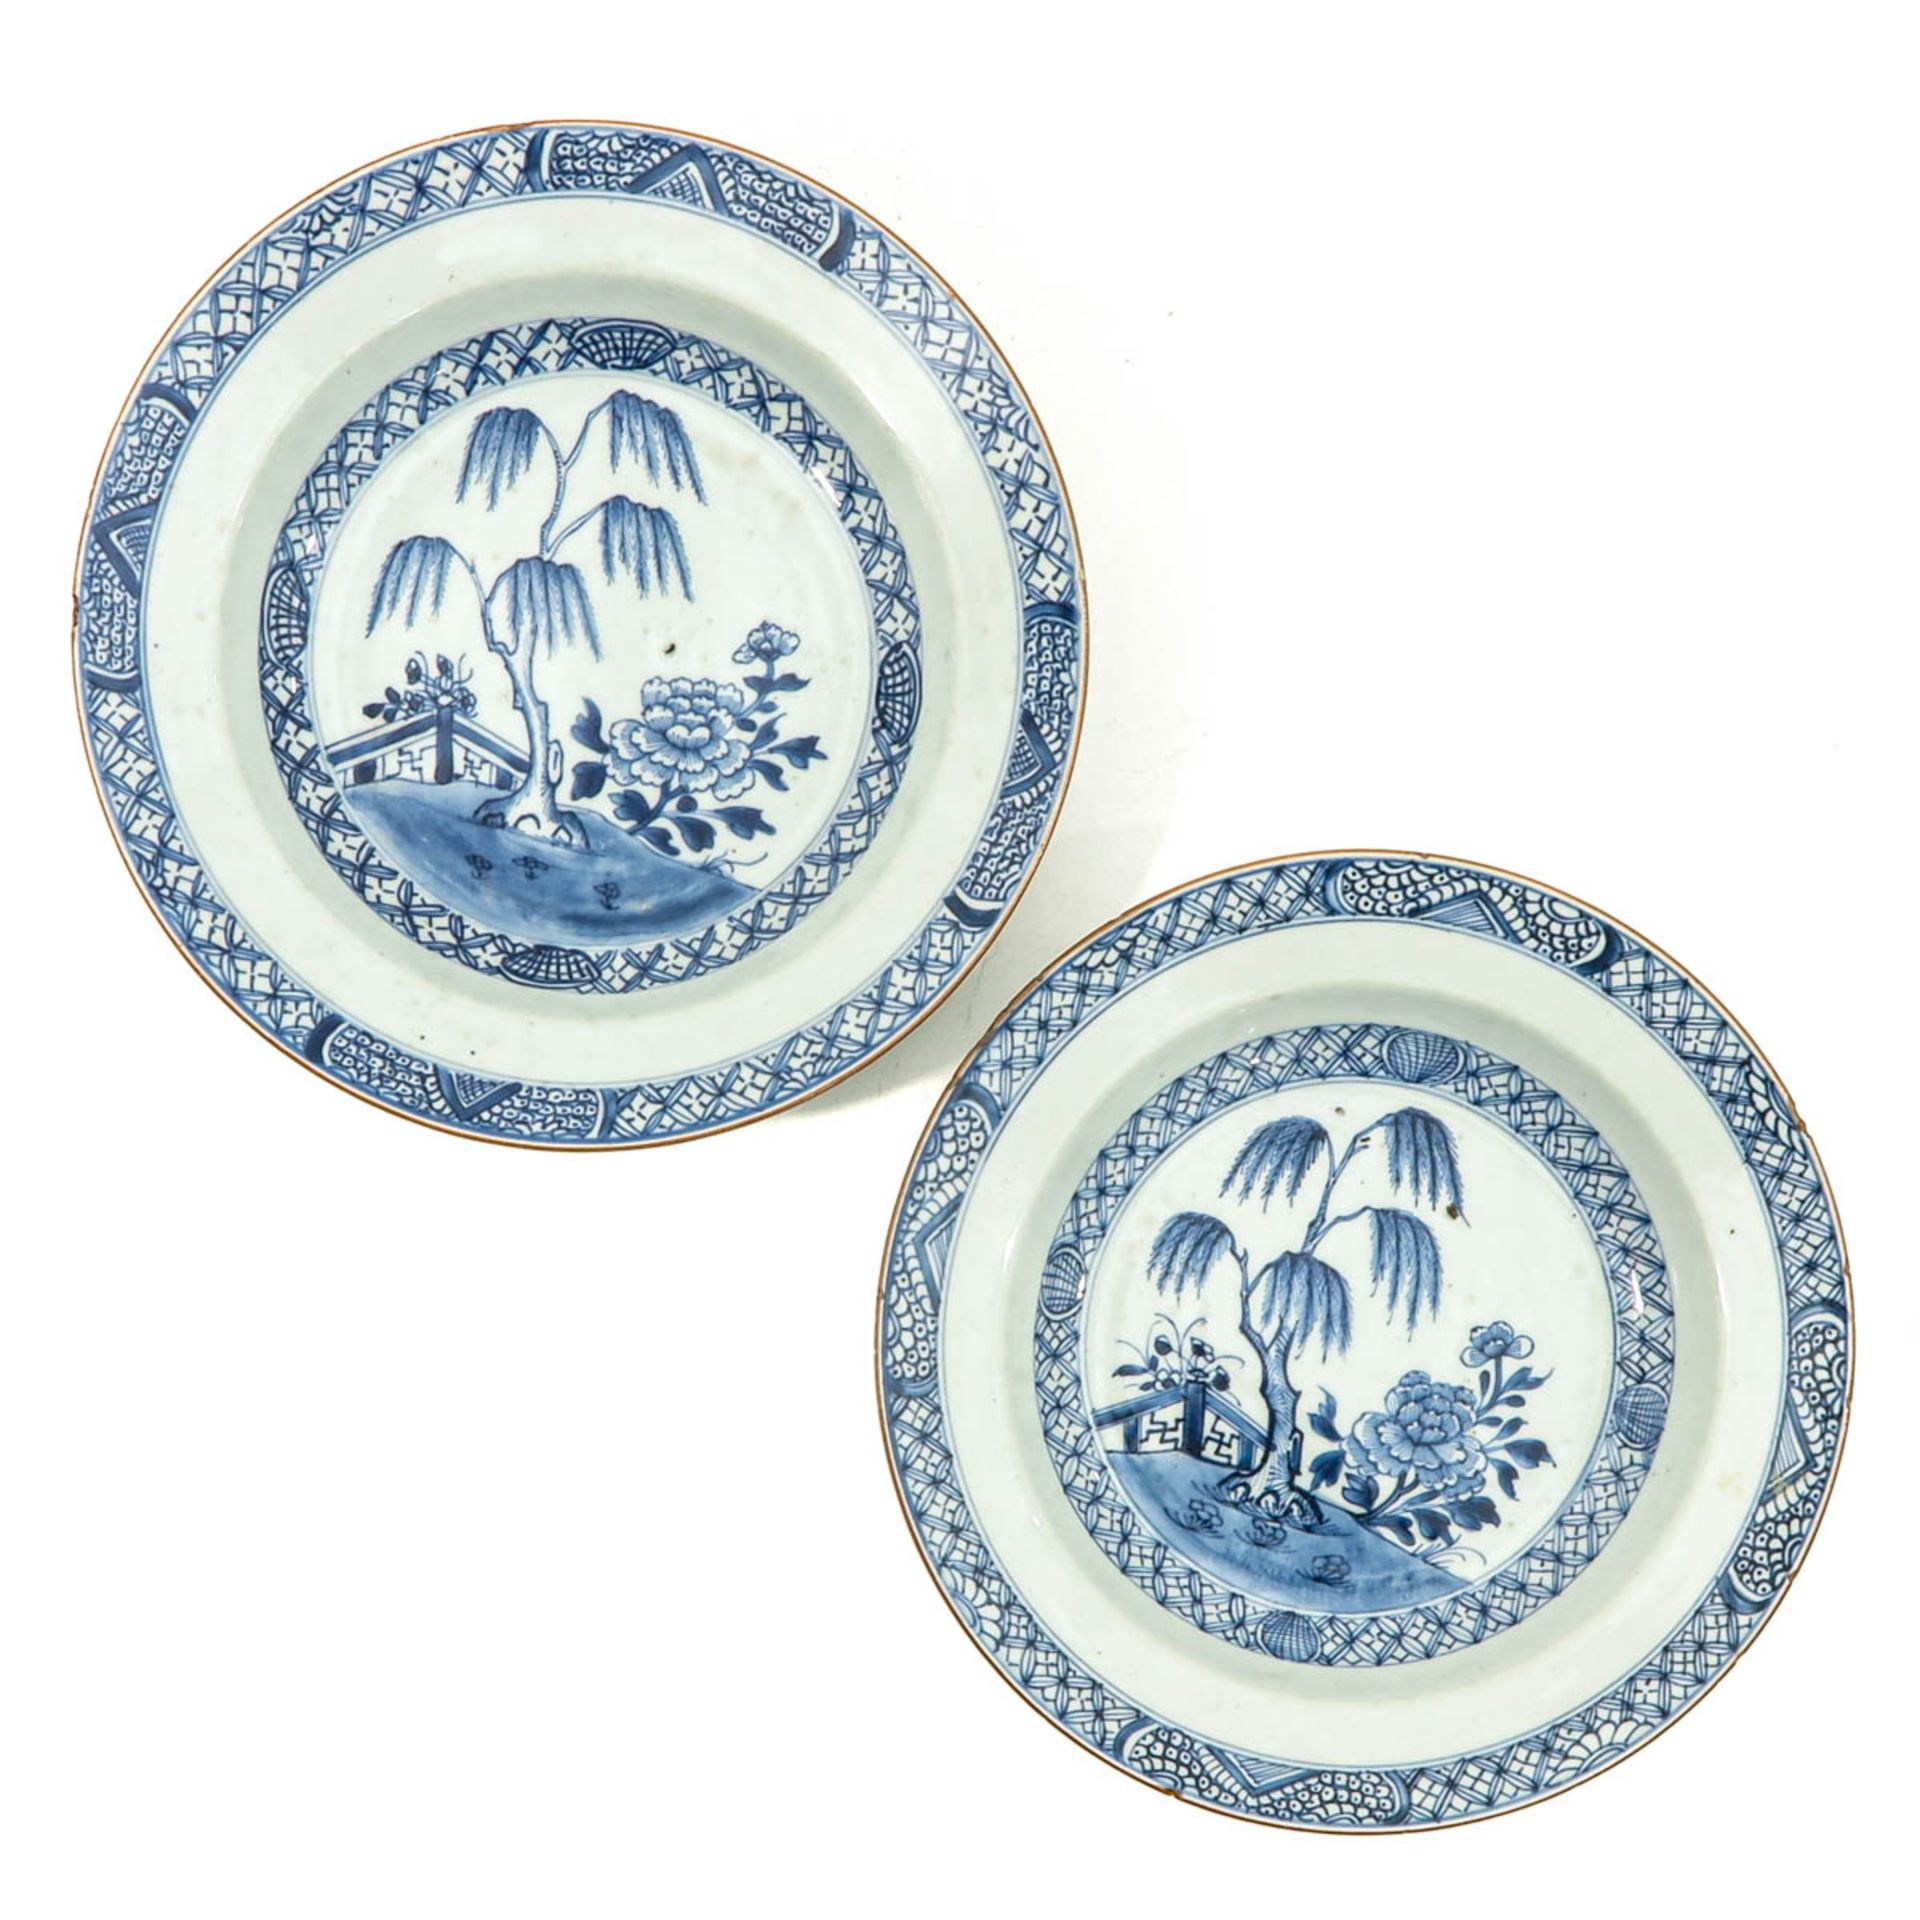 A Series of 6 Blue and White Plates - Bild 5 aus 10